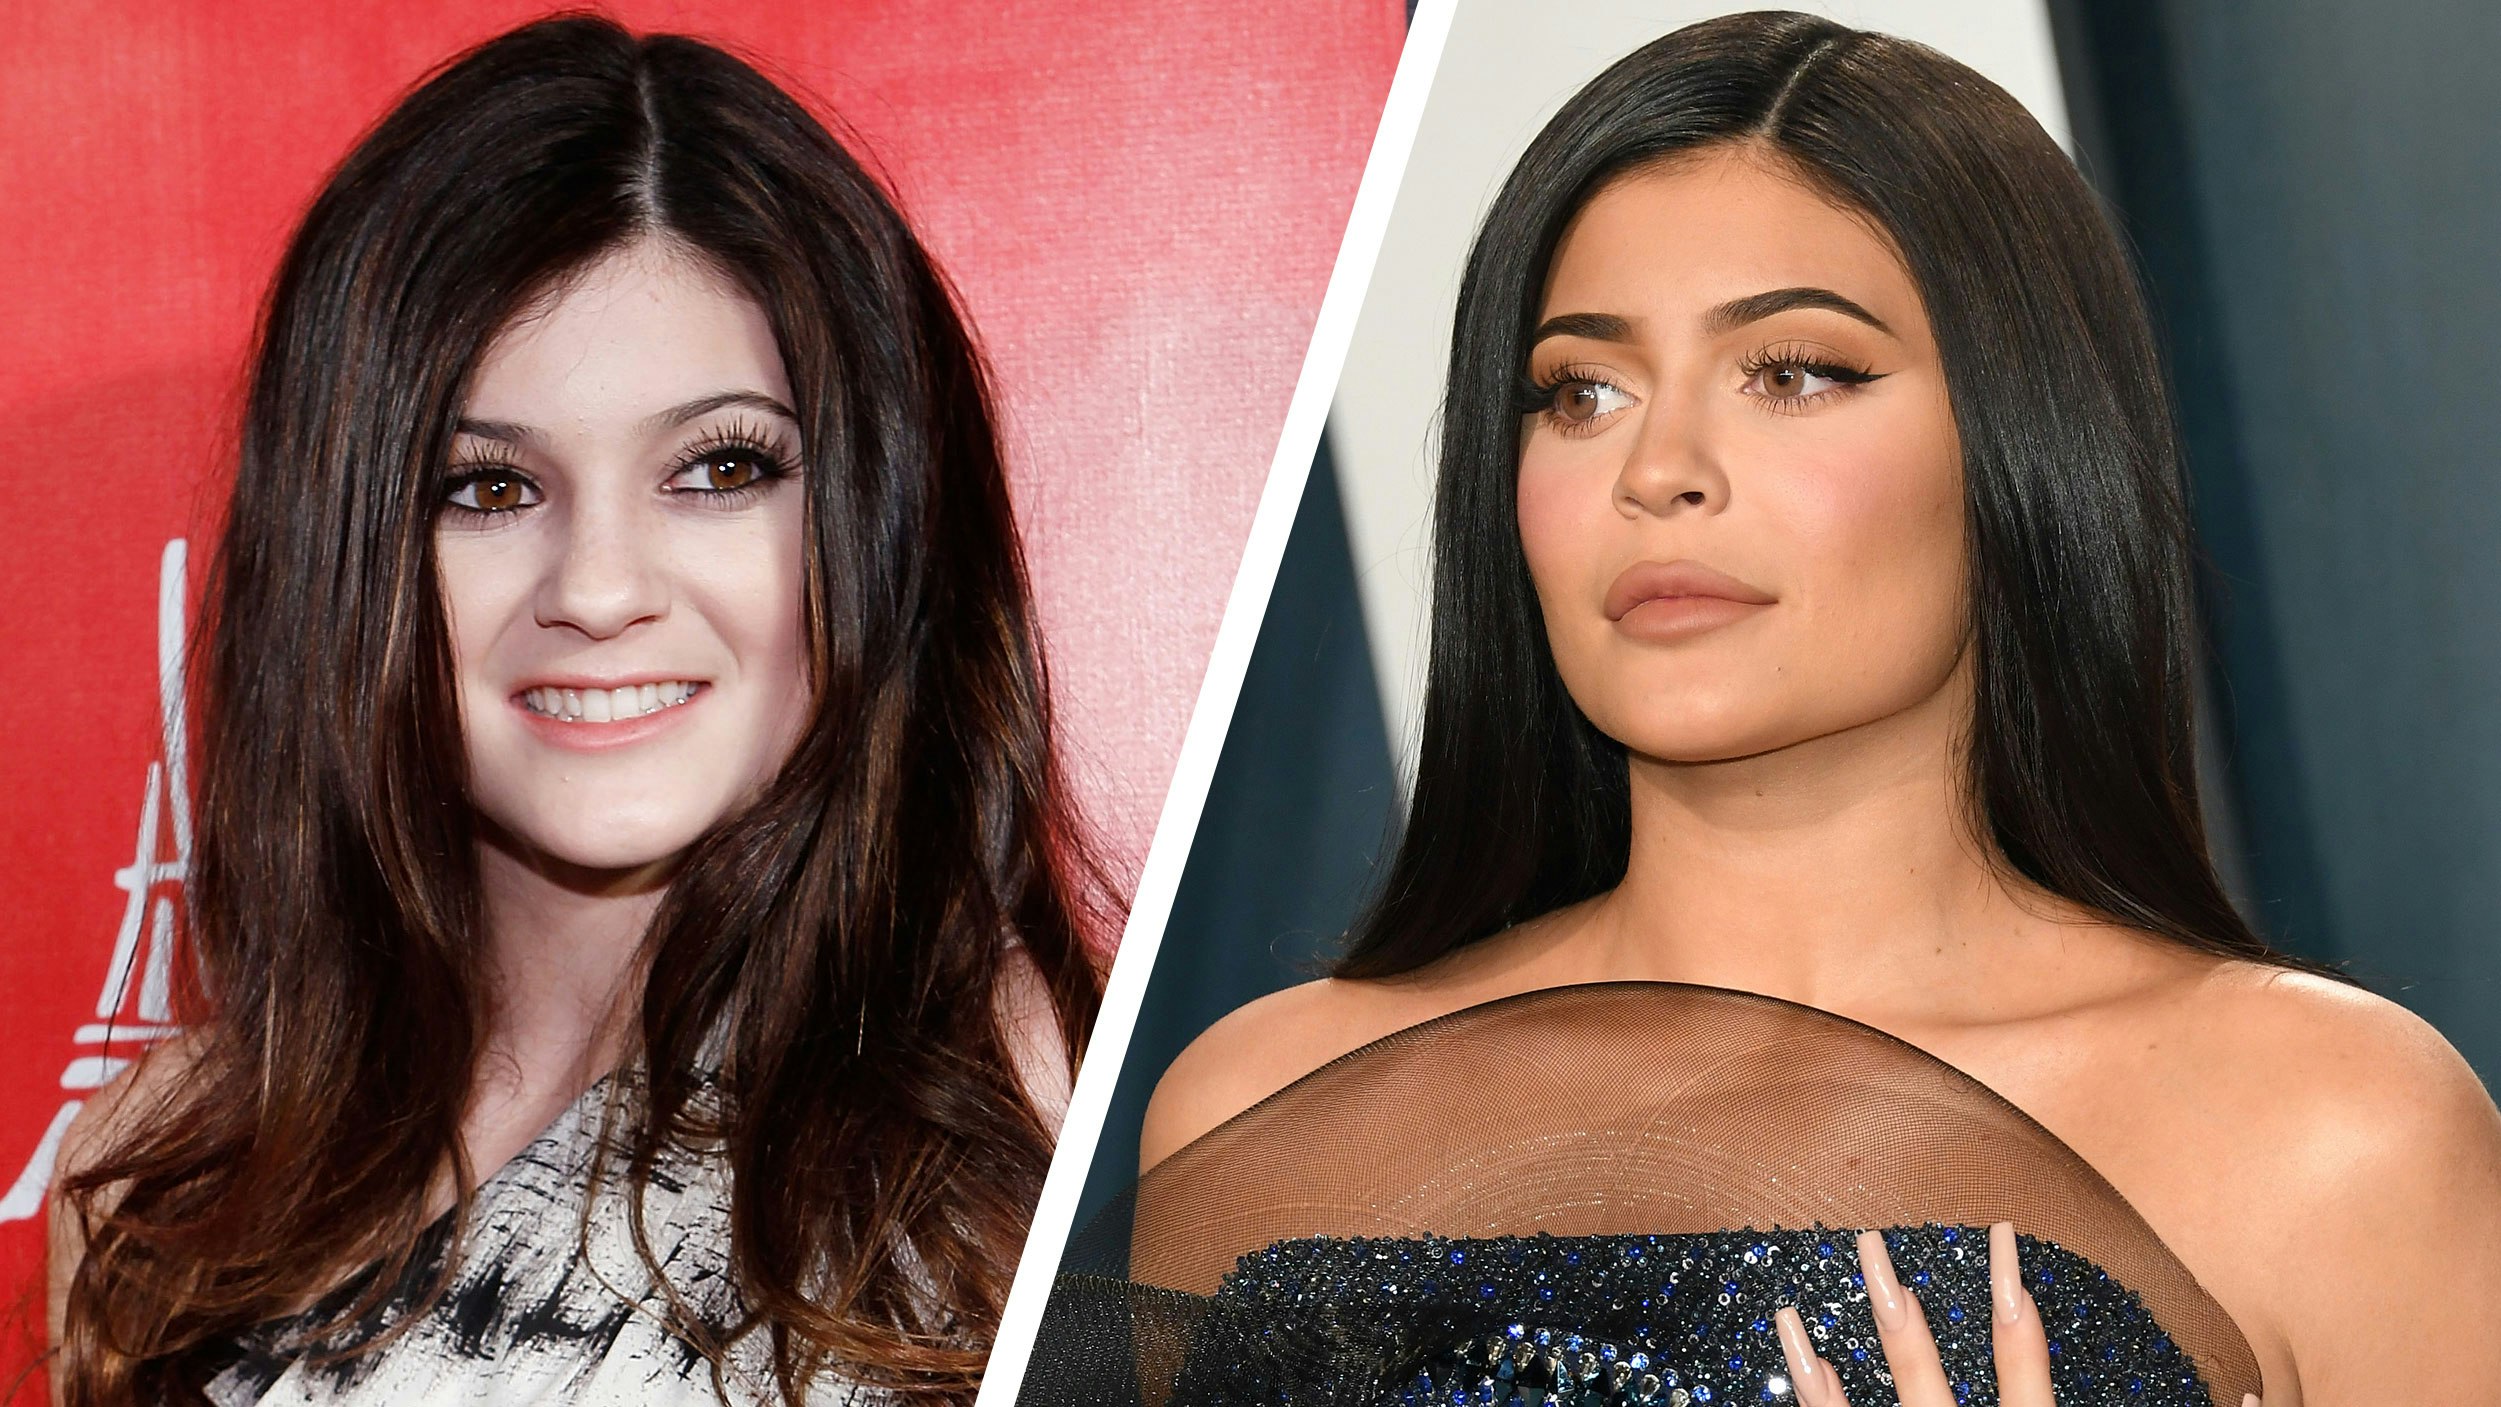 Kylie Jenner before and after: her jaw-dropping transformation pics